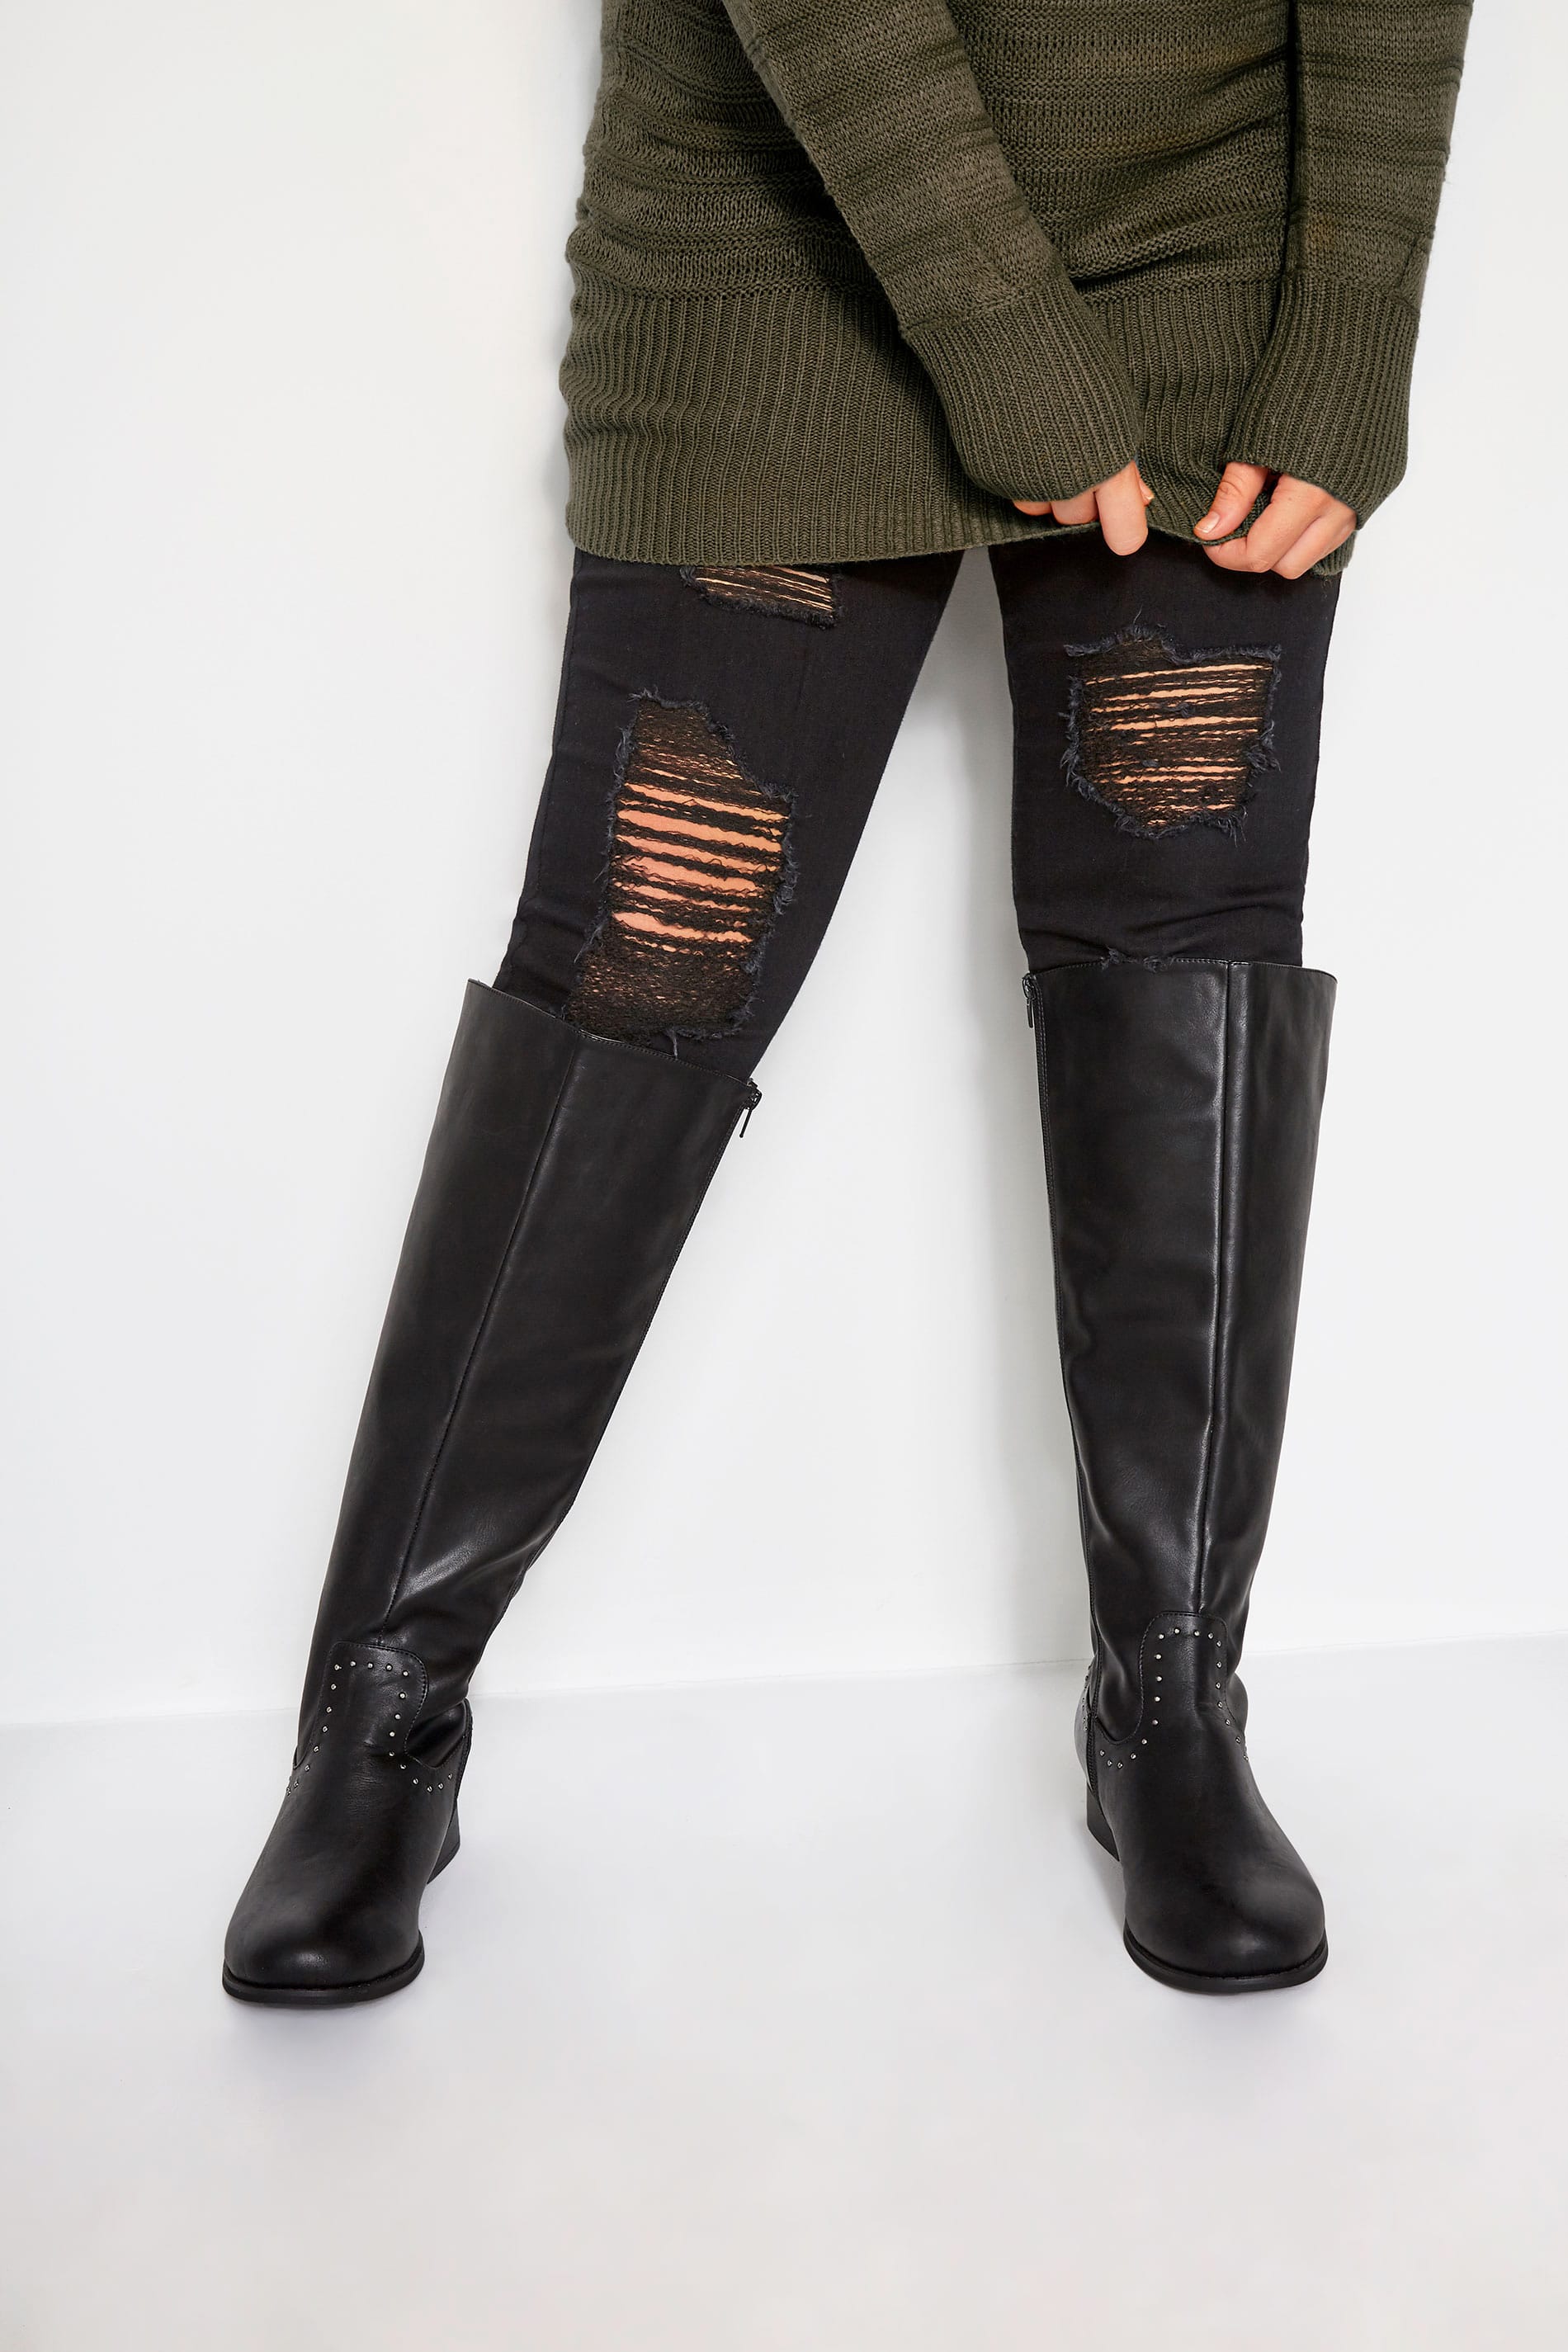 plus size knee high boots outfit